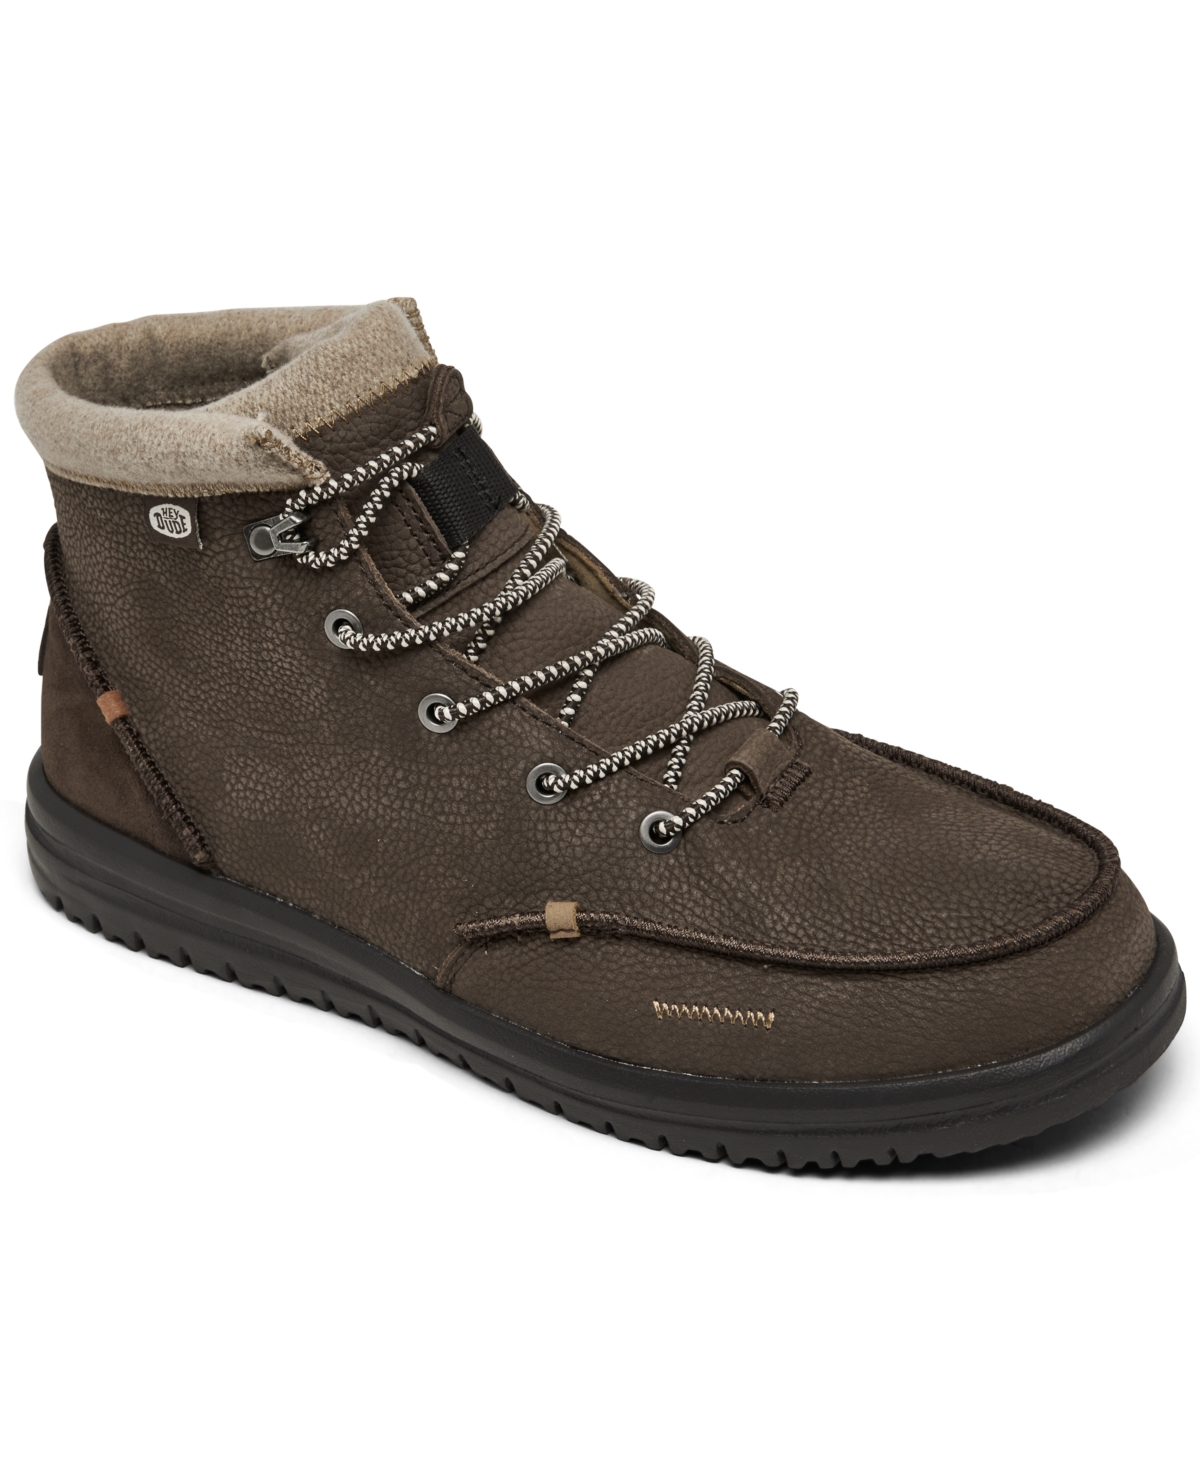 Men's Bradley Leather Casual Boots from Finish Line - Brown